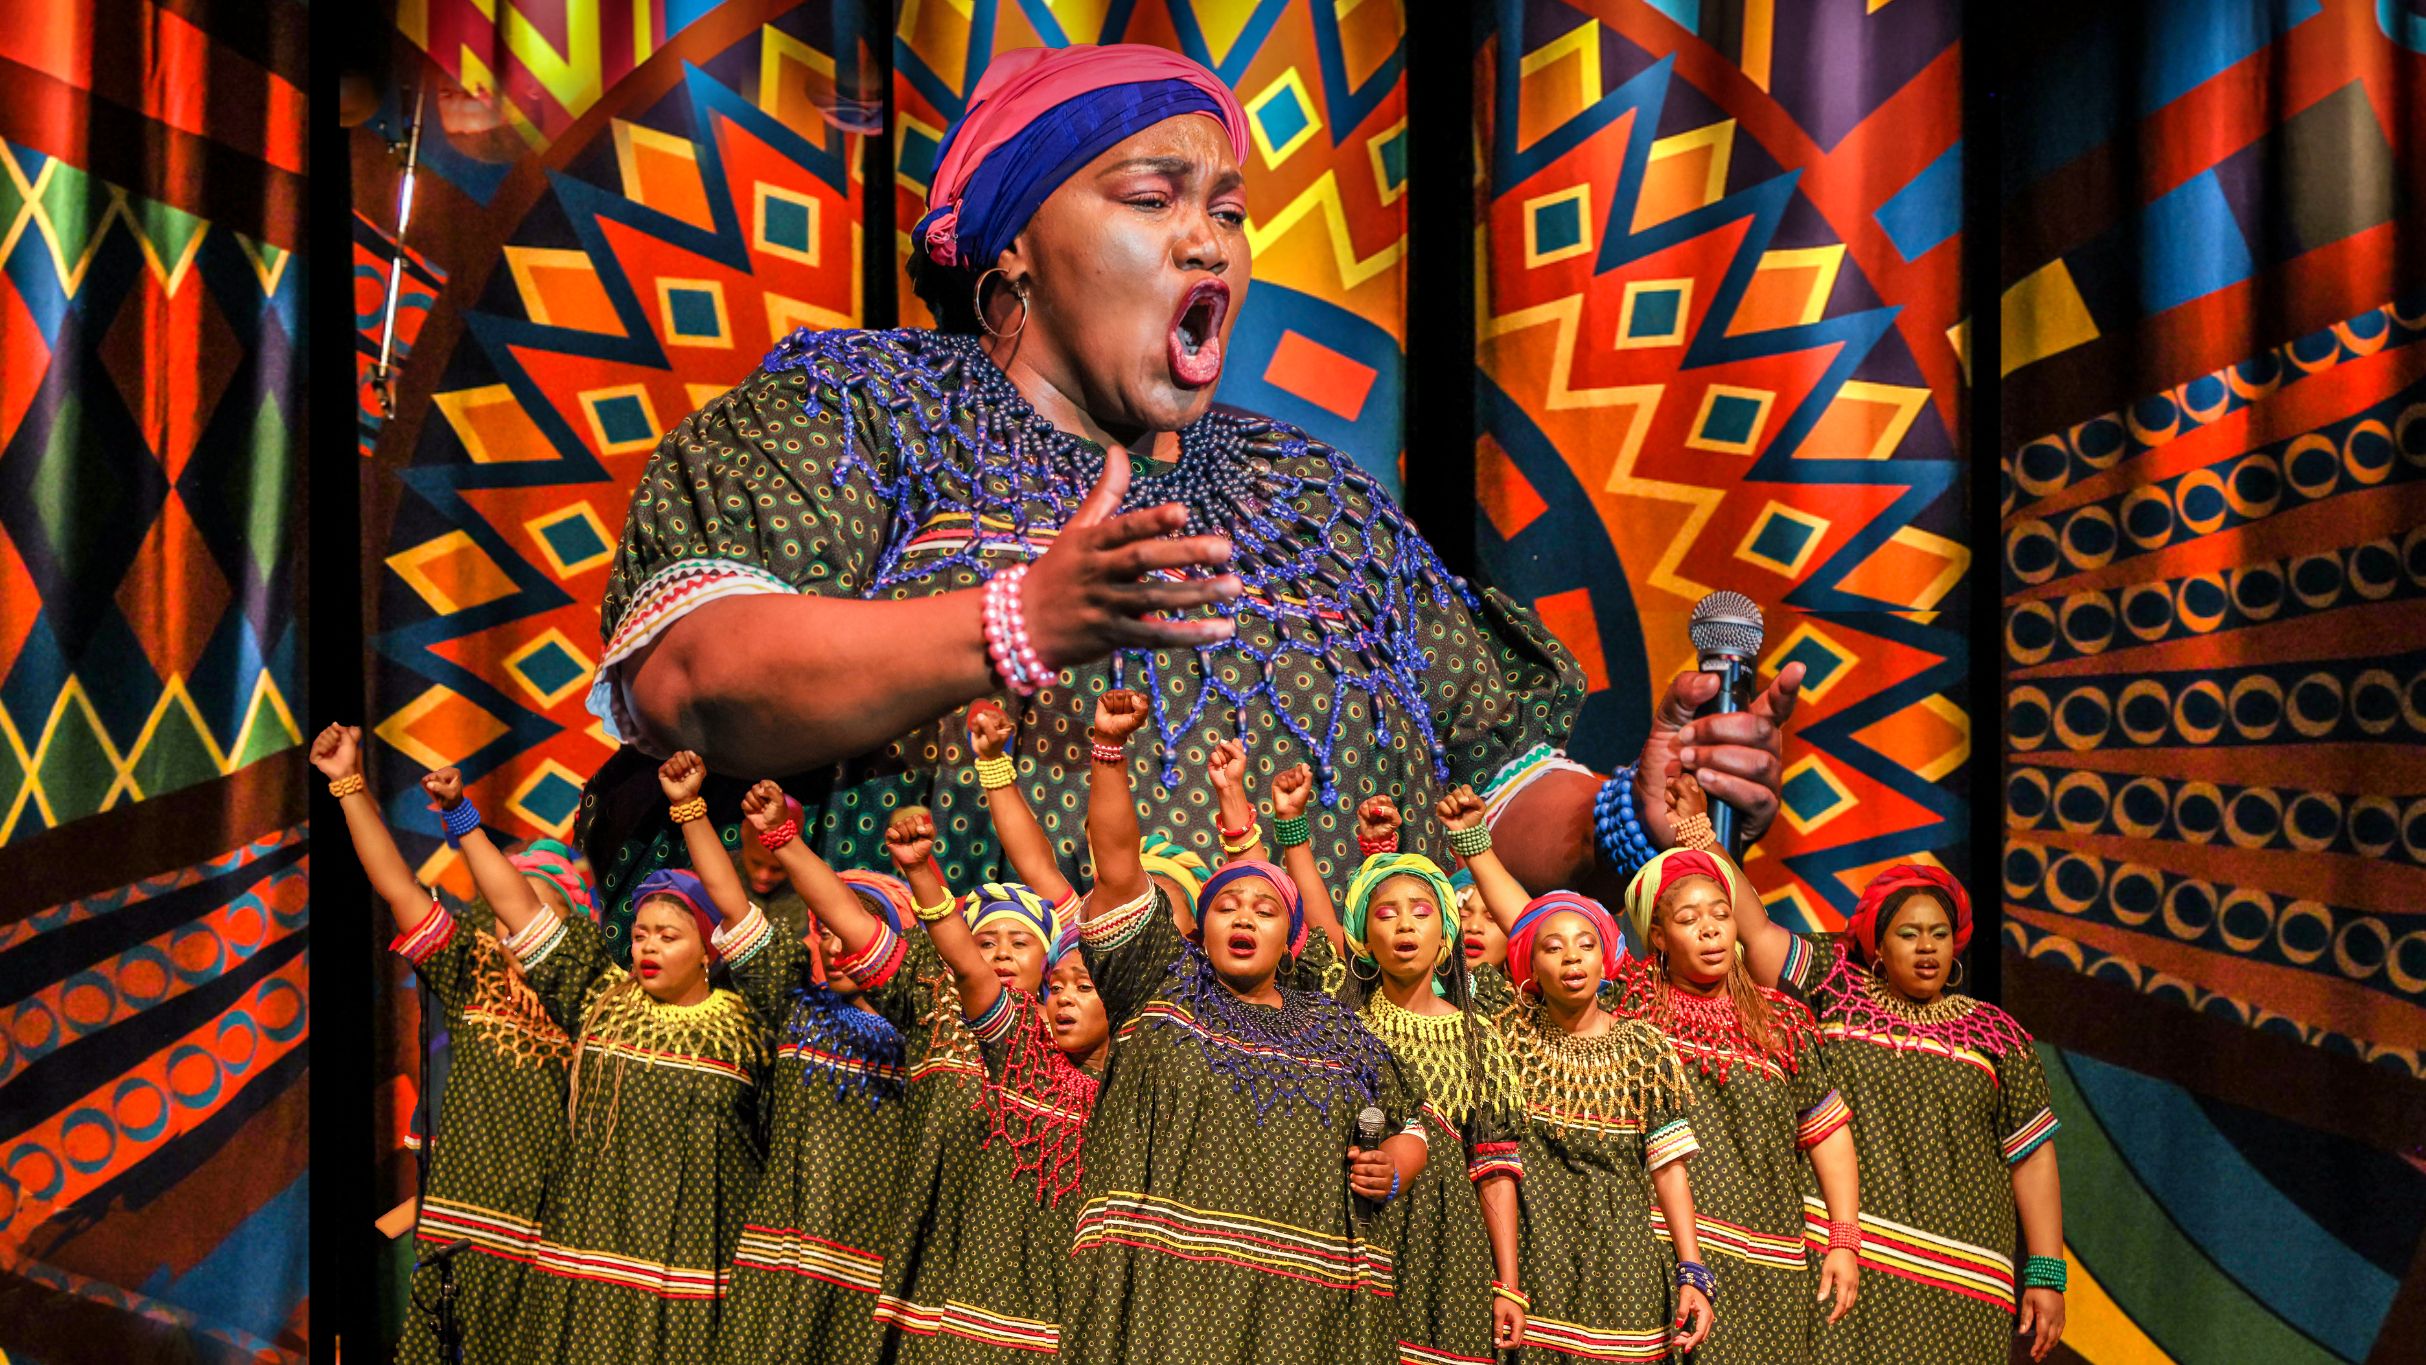 Image used with permission from Ticketmaster | Soweto Gospel Choir - Hope tickets